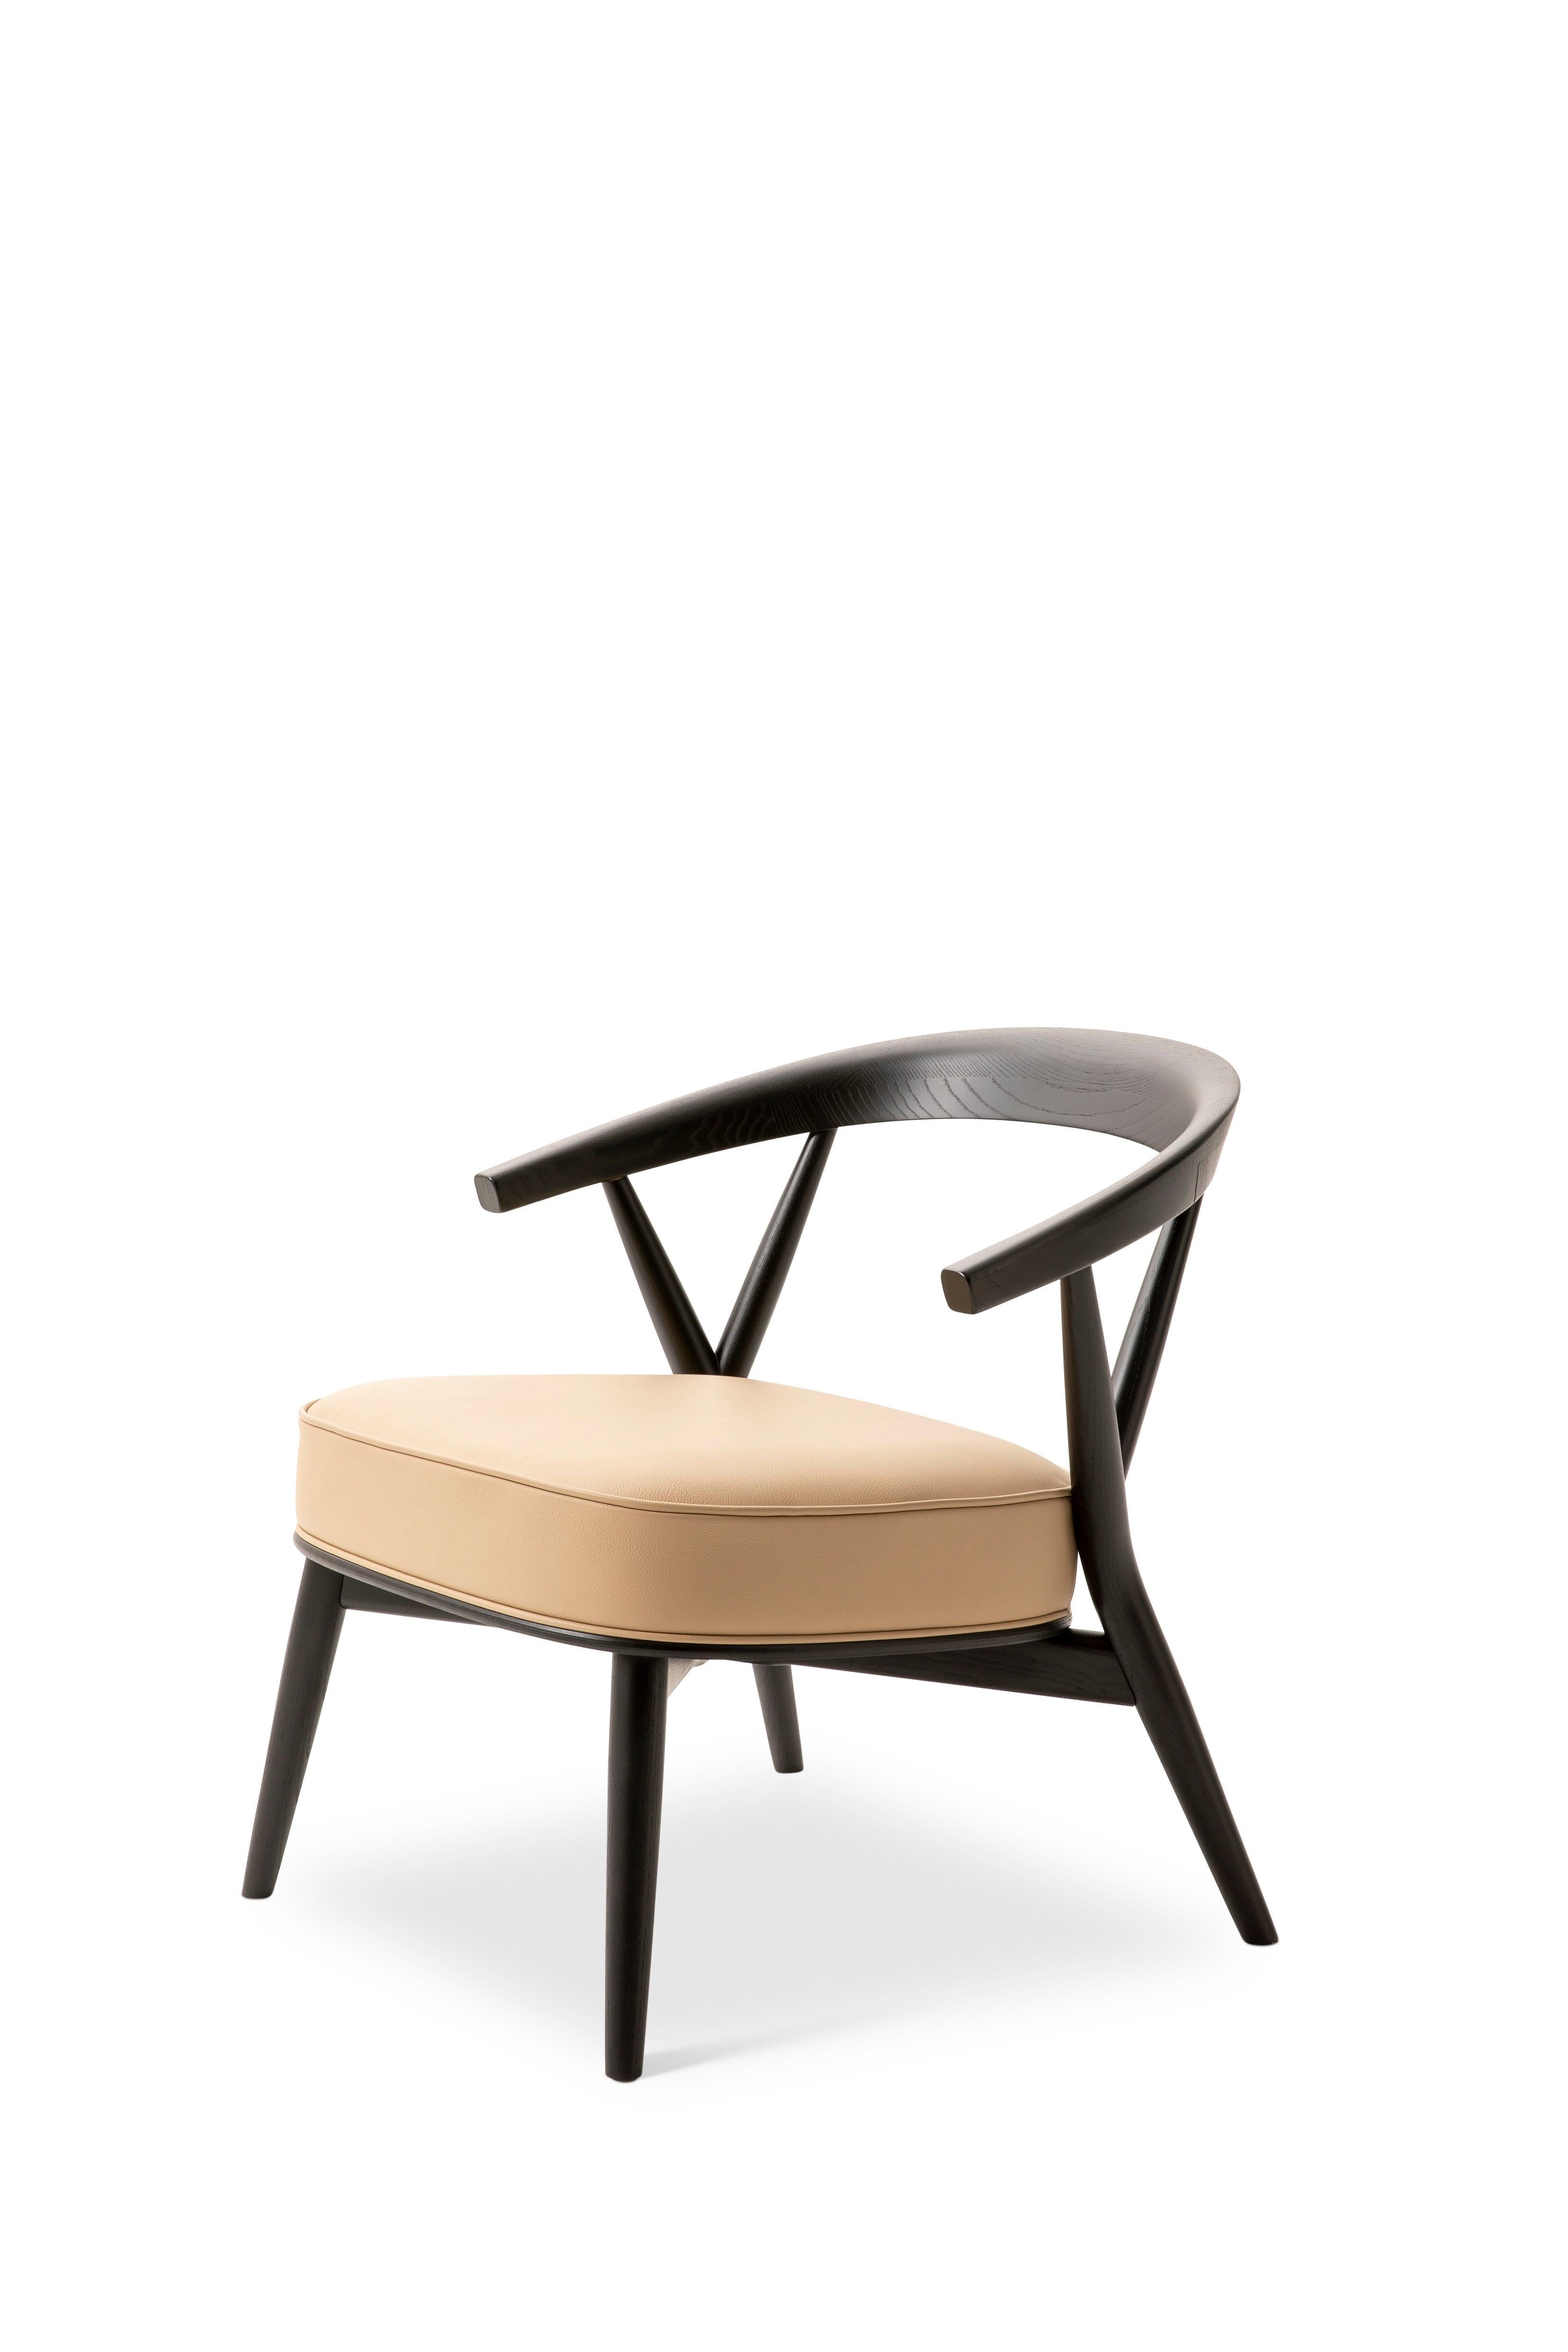 The Newood relax light chair, by BrogliatoTraverso, is an elegant interpretation of the Newood chair, but this version is lighter due to the elimination of the eight rods that characterized the original backrest. Made of solid ash wood, Newood Relax